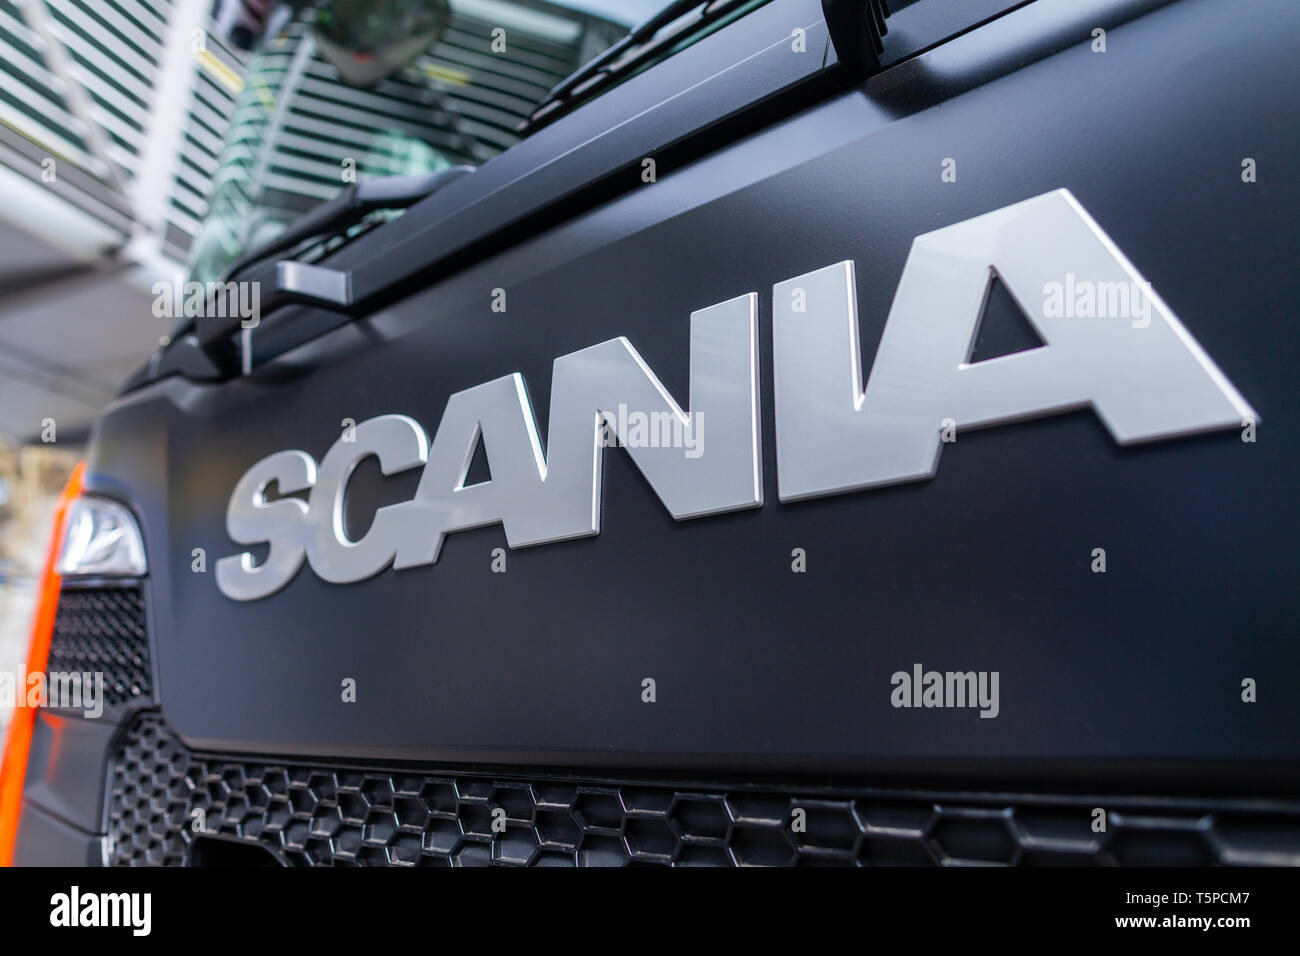 MUNICH / GERMANY - APRIL 14, 2019: Scania branch on a Scania truck. Scania AB is a major Swedish manufacturer of commercial vehicles - specifically he Stock Photo